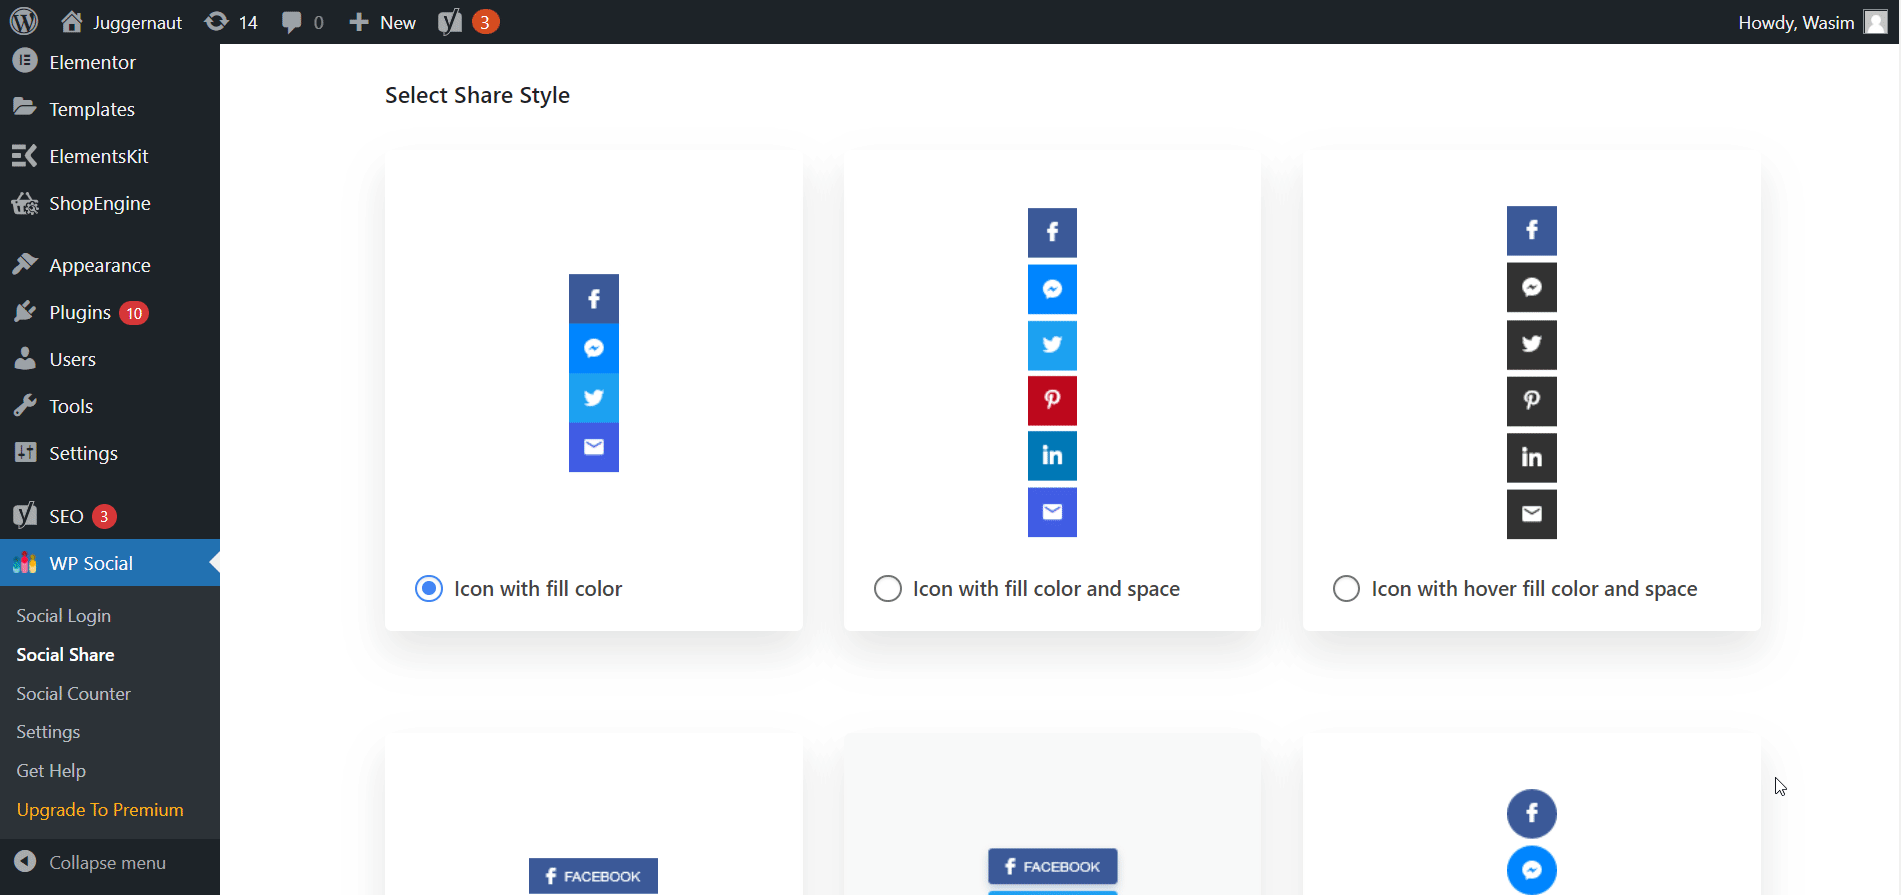 Select your preferred share button style